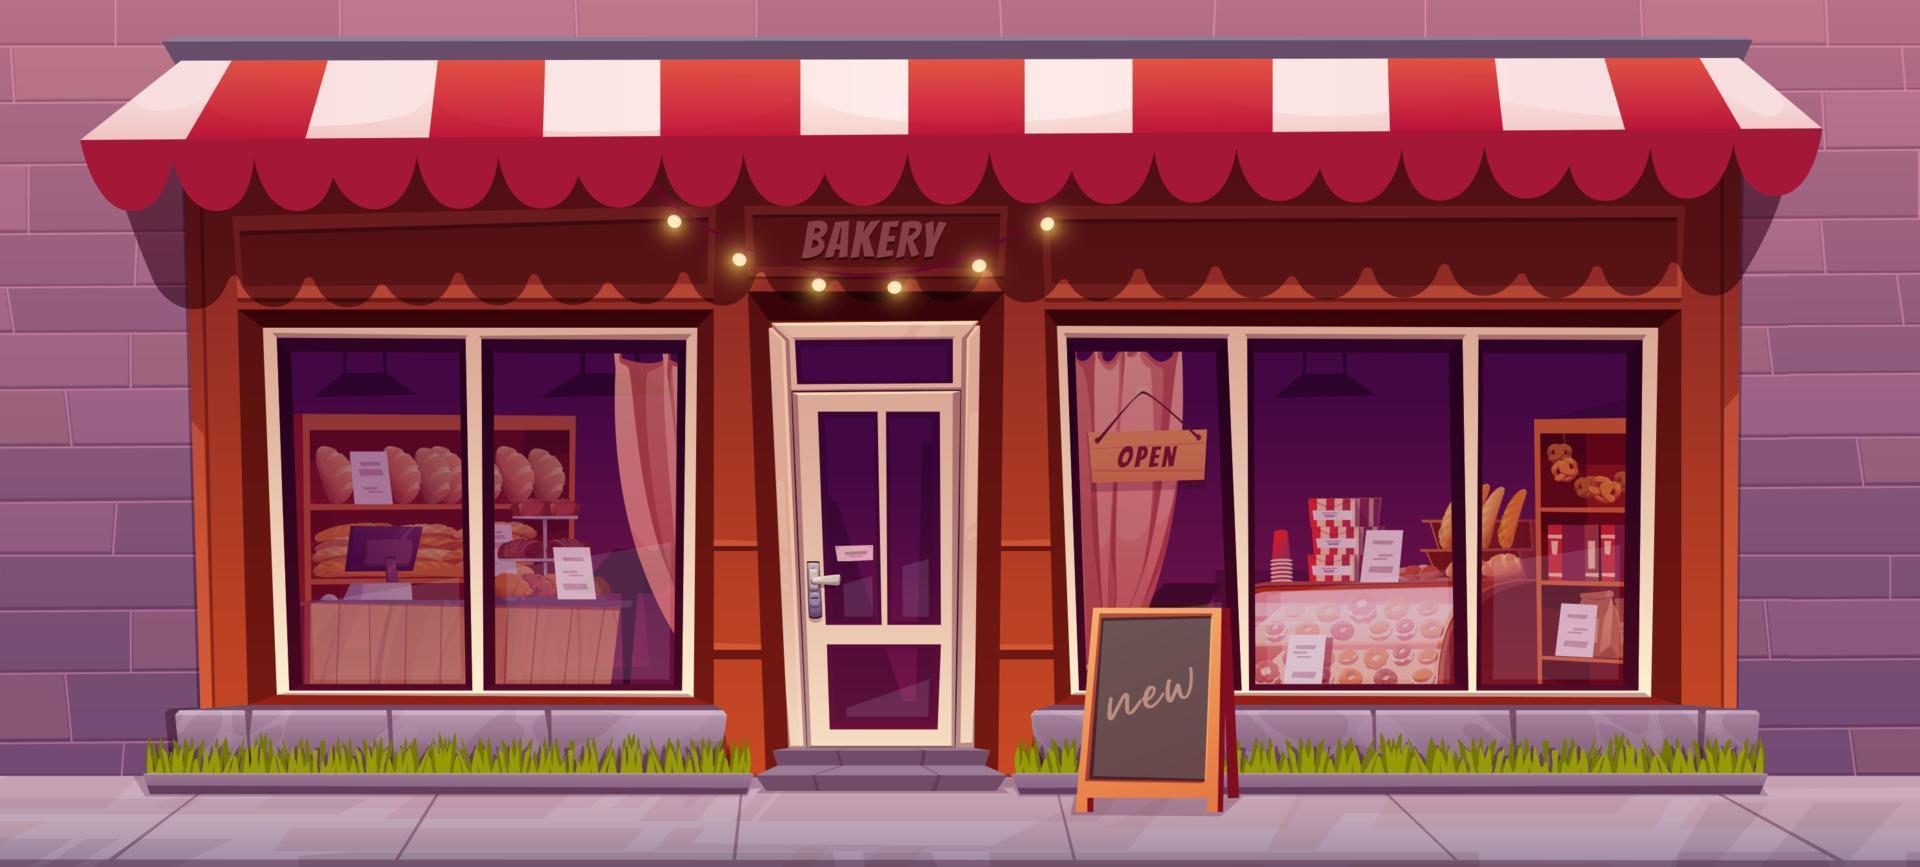 Bakery shop facade with large windows and door vector